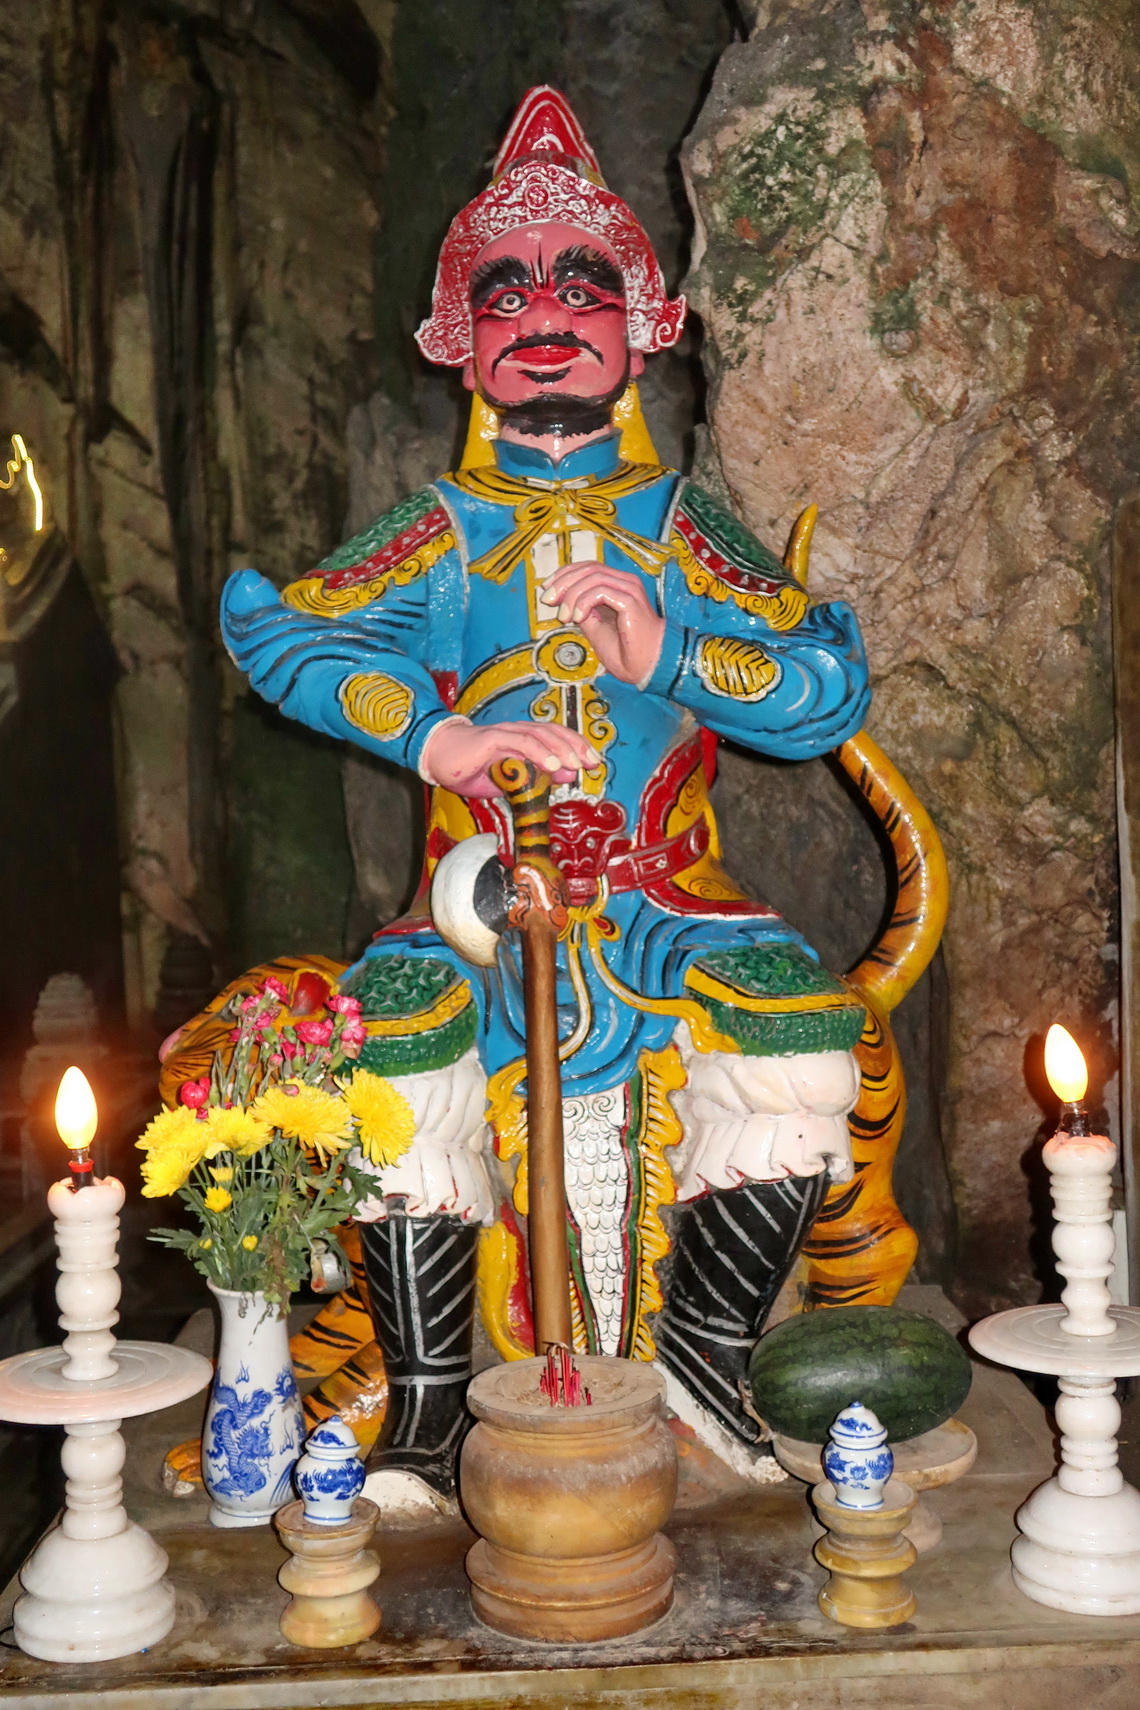 Guard in the Huyen Khong Cave of the Marble Mountains